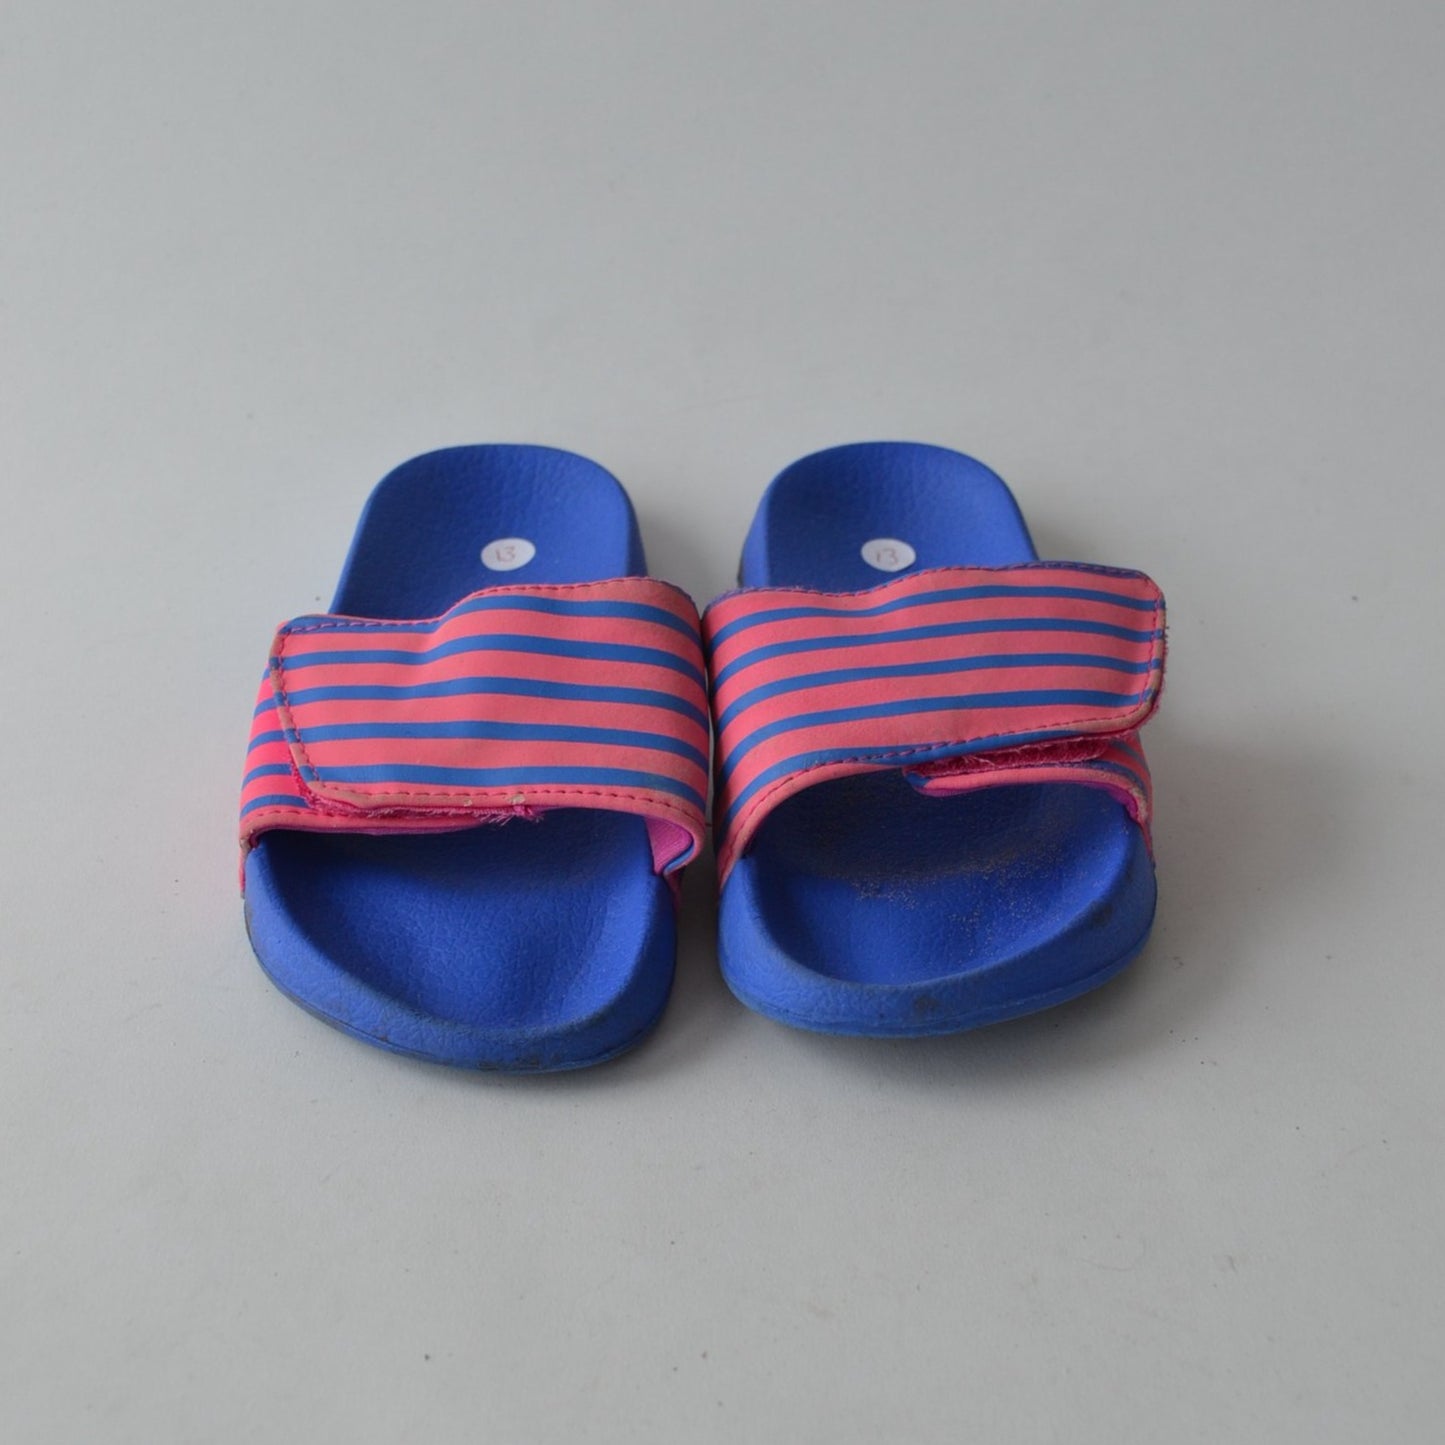 Blue and Peach Sliders Shoe Size 13 (jr)